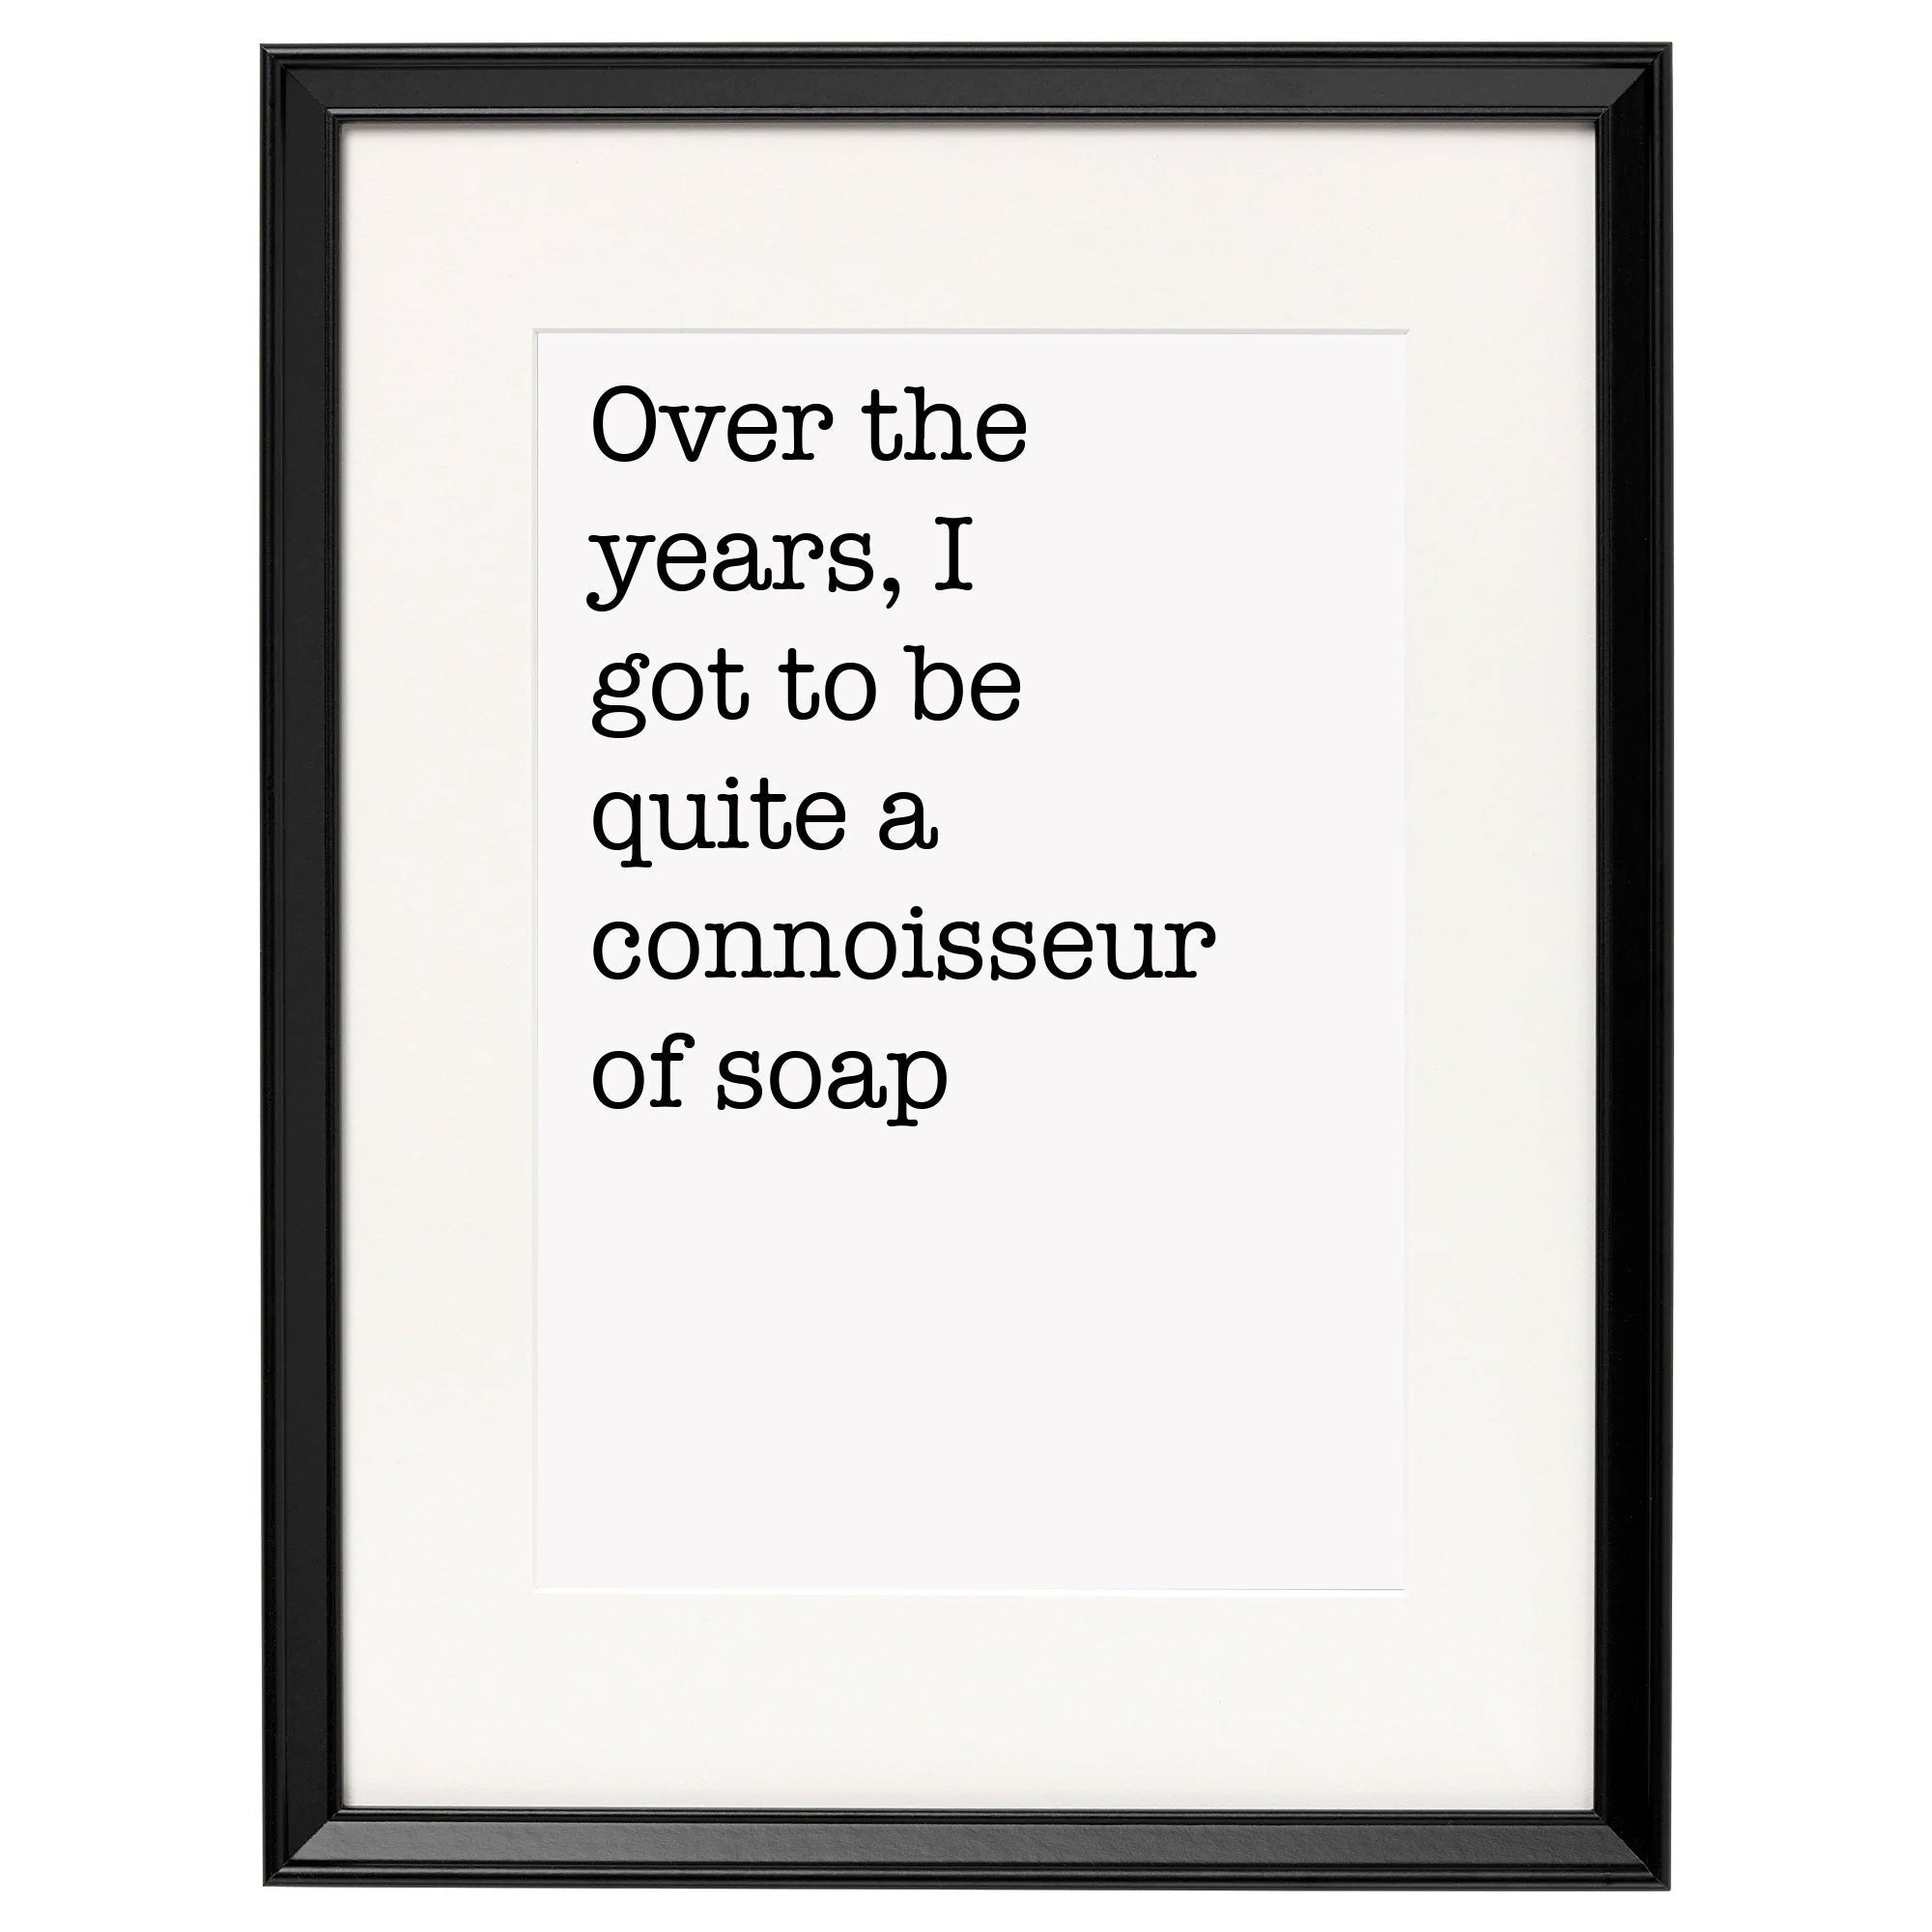 Connoisseur of Soap Funny Holiday Washroom Print